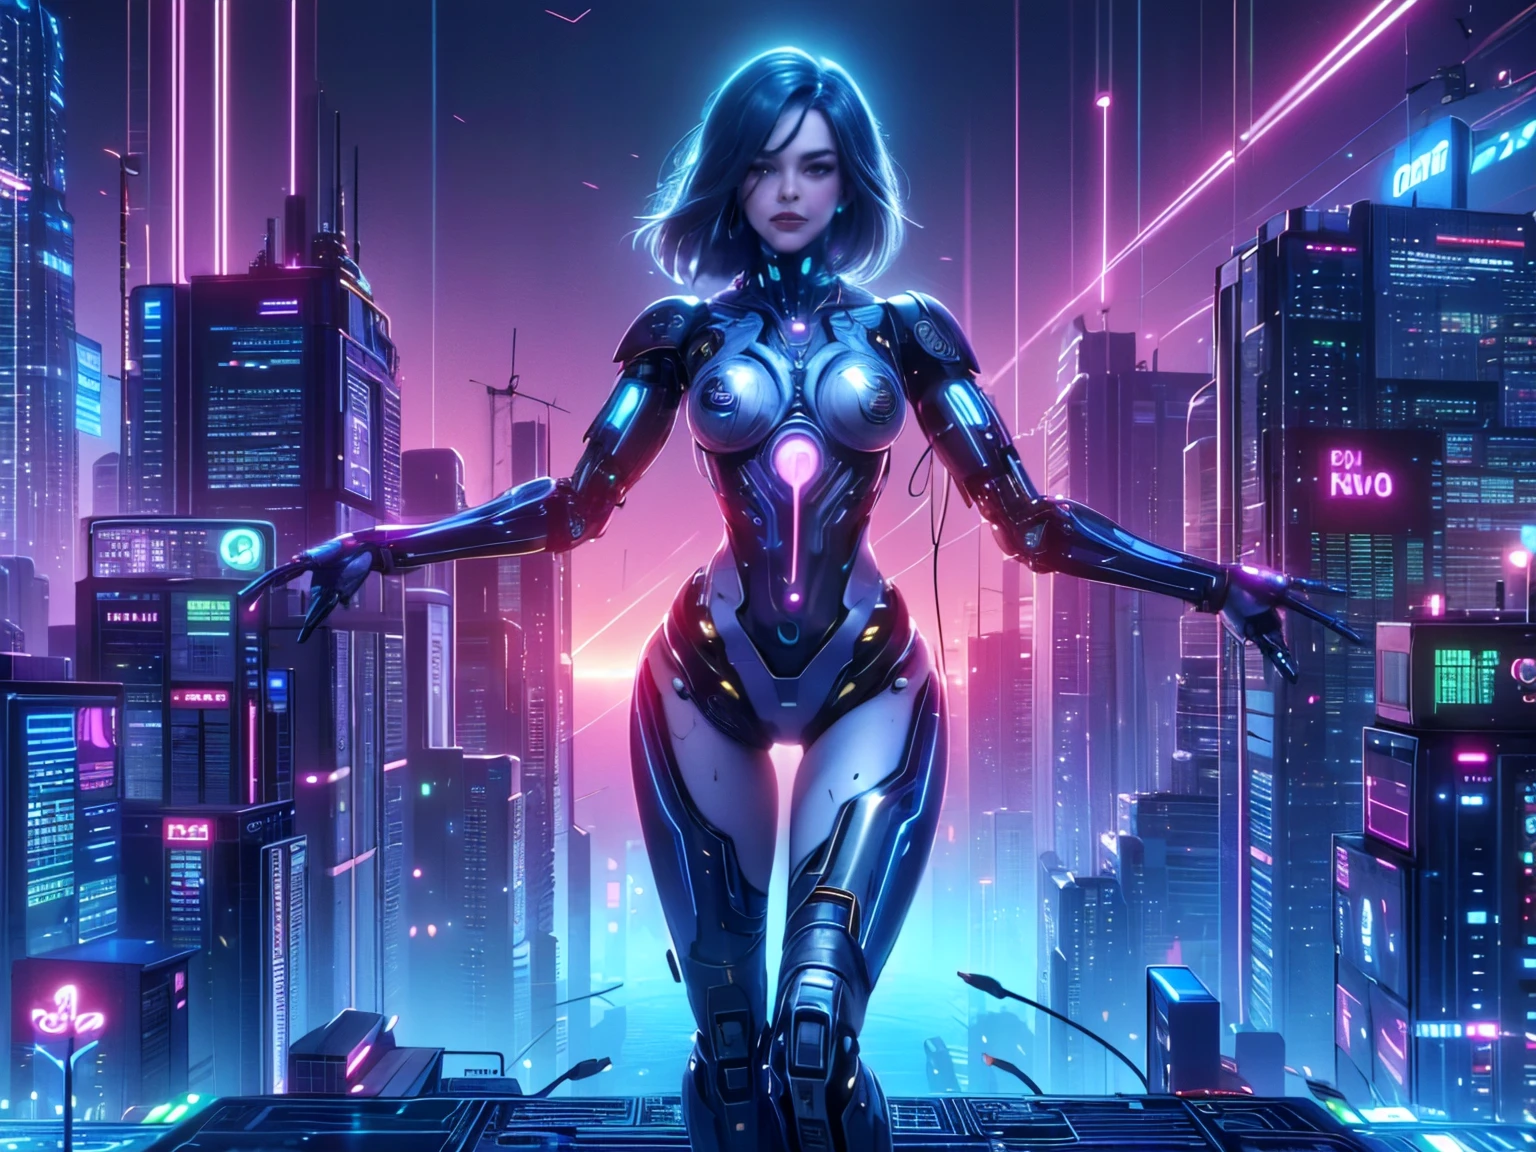 top quality, future world, State-of-the-art robot, Beautiful Woman, Transformed into a cyborg except for the face and some parts, ig model, sexy images, Wires are connected to the back of the body, As sexy as possible, Partial exposure of chest and lower body, I can see my whole body,